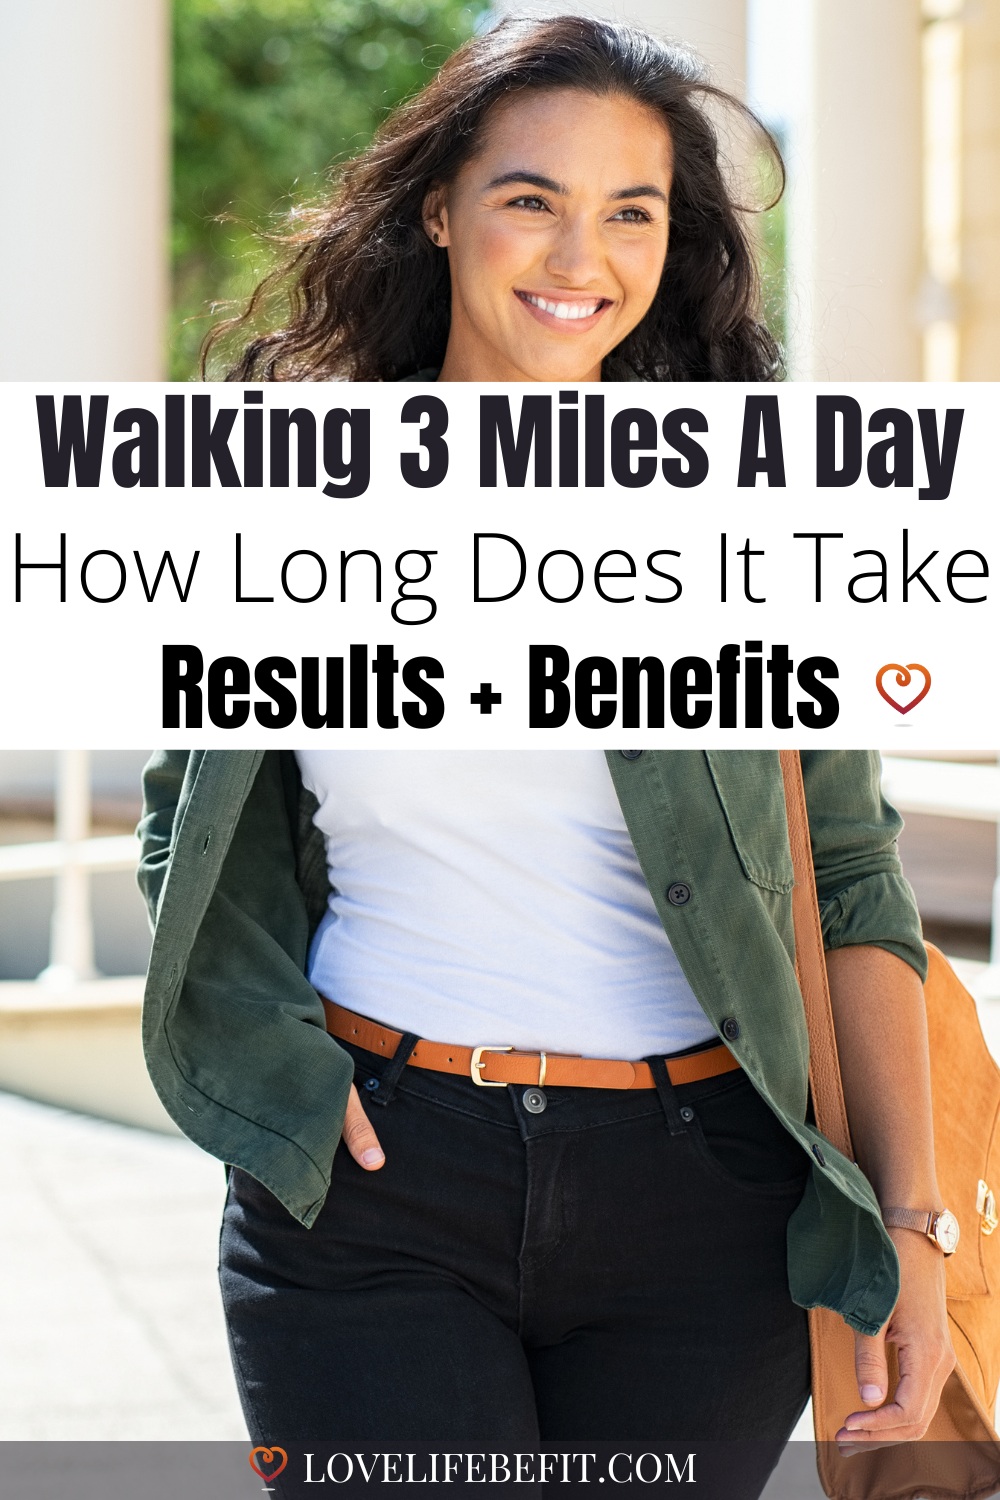 walking 3 miles a day how long does it take?